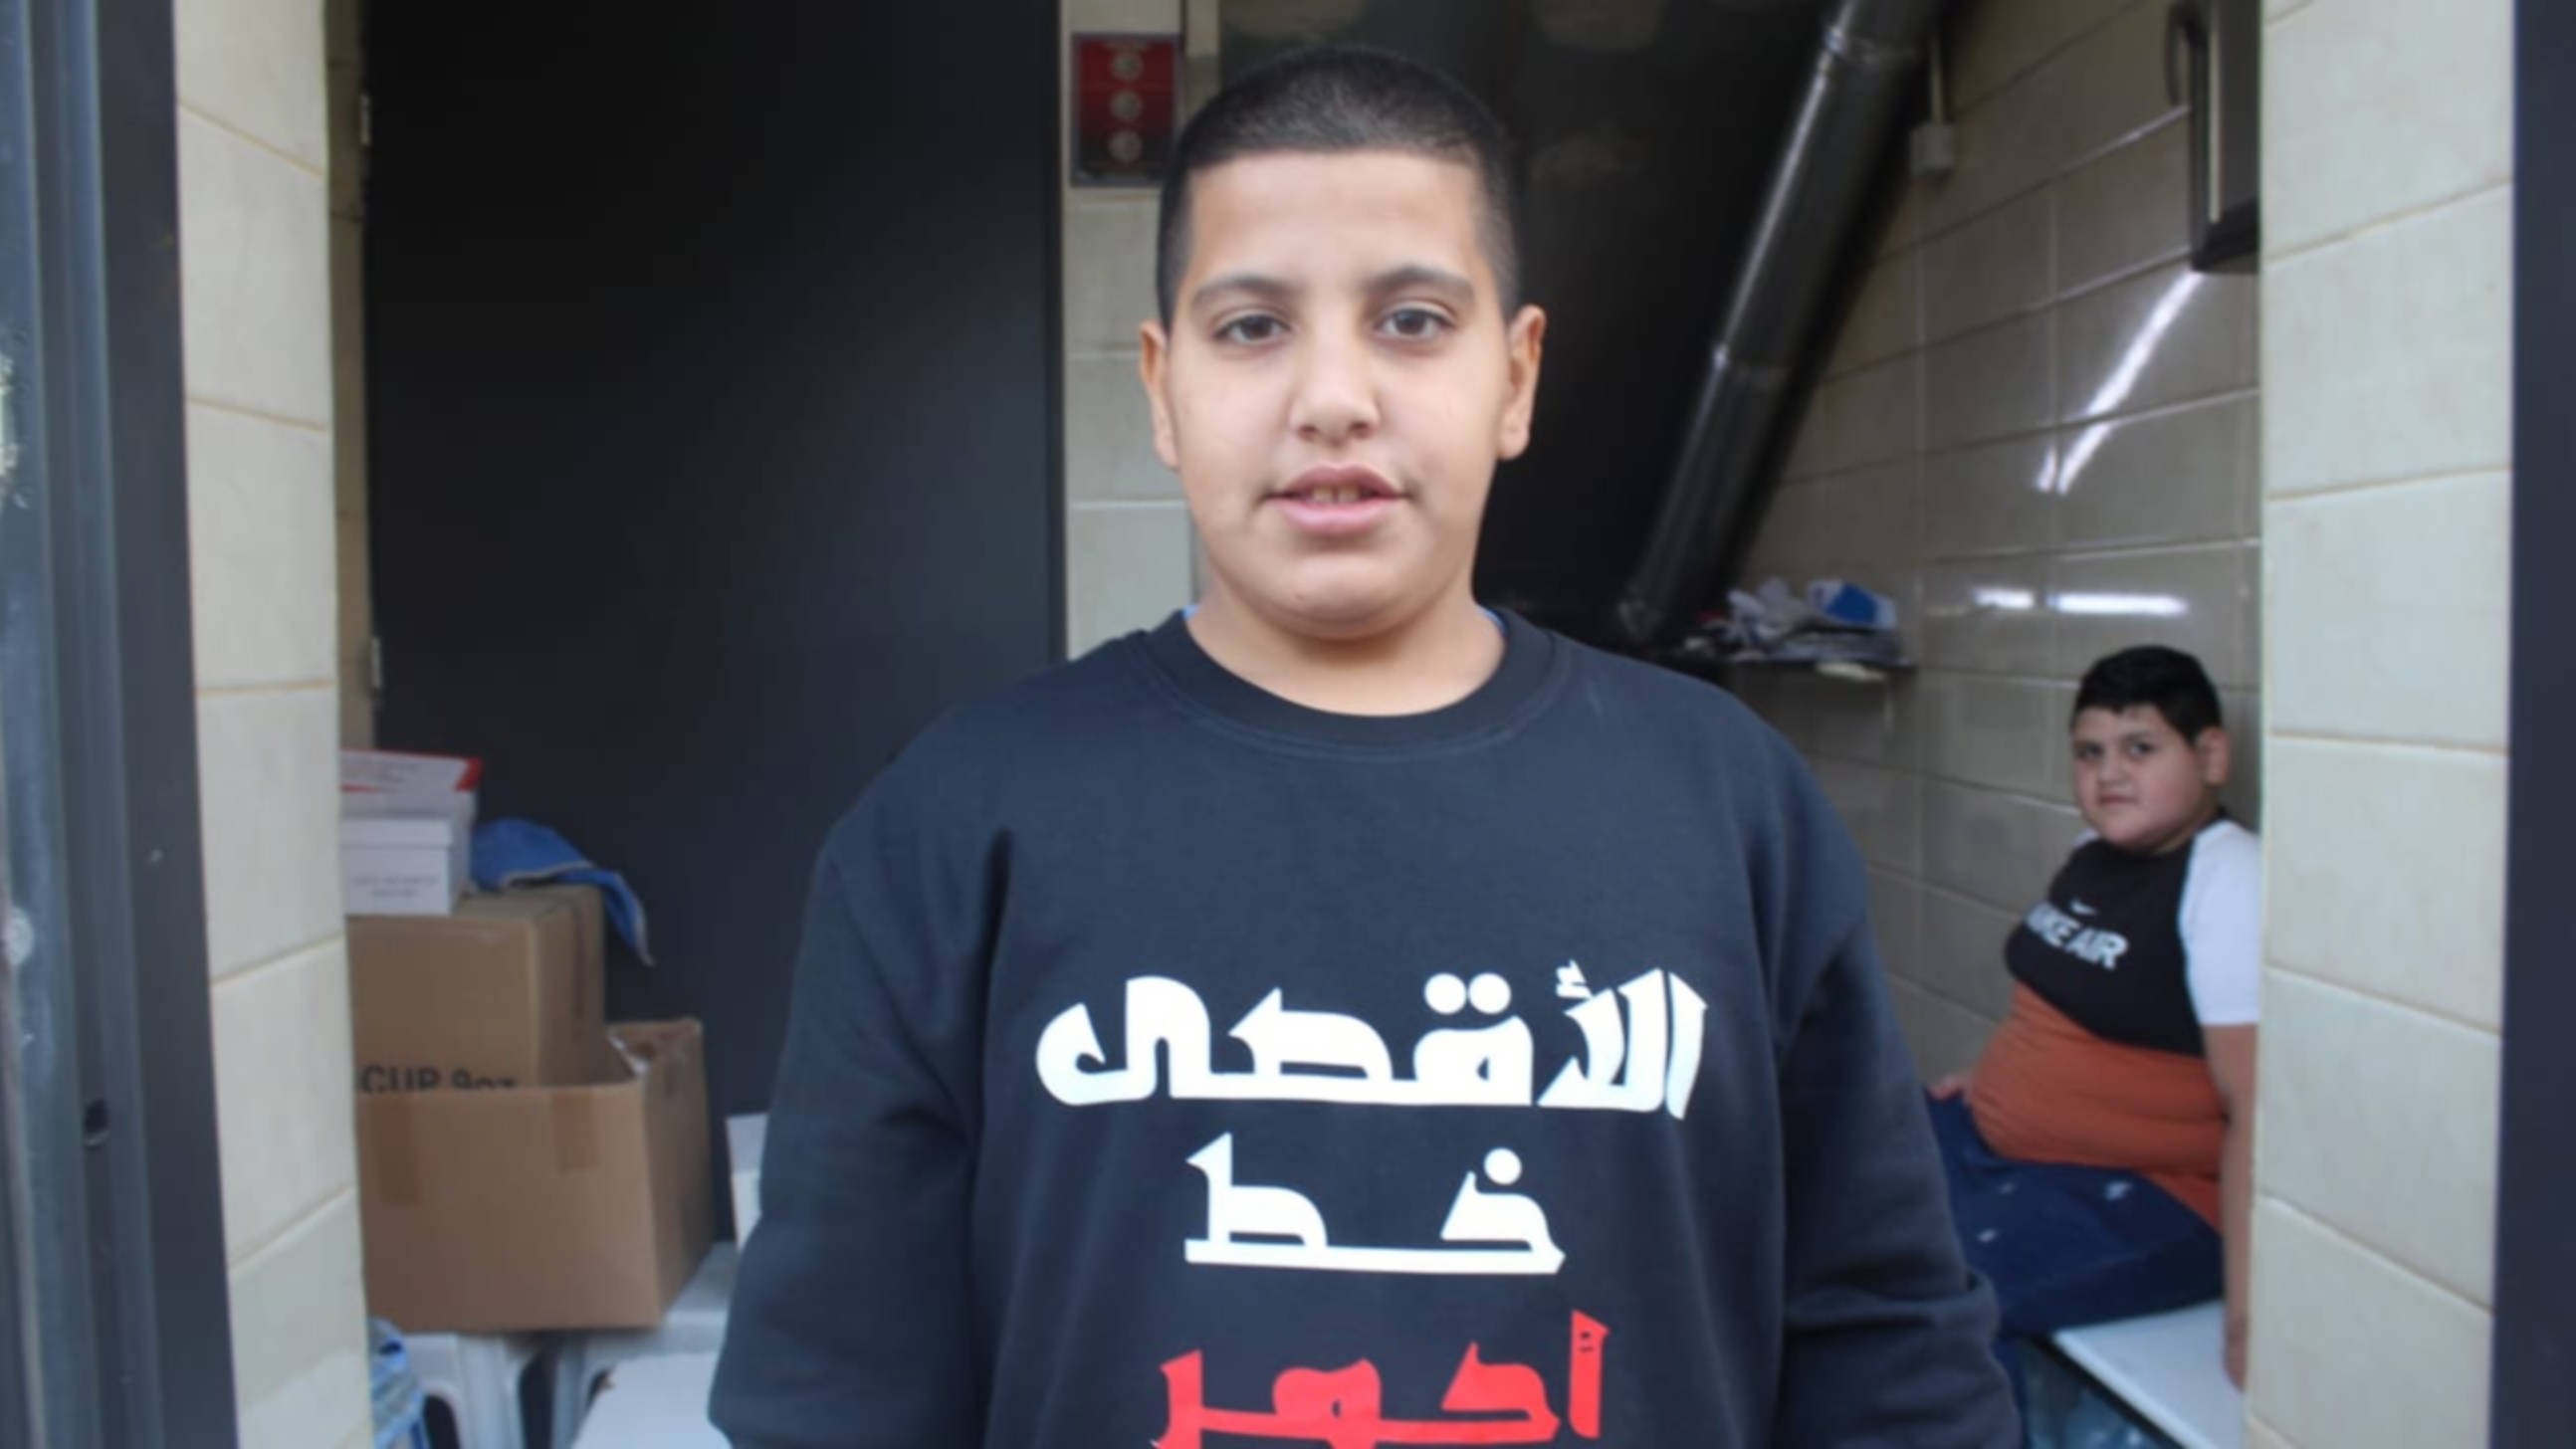 Ahmed Salaymeh, 14, has been in prison since May